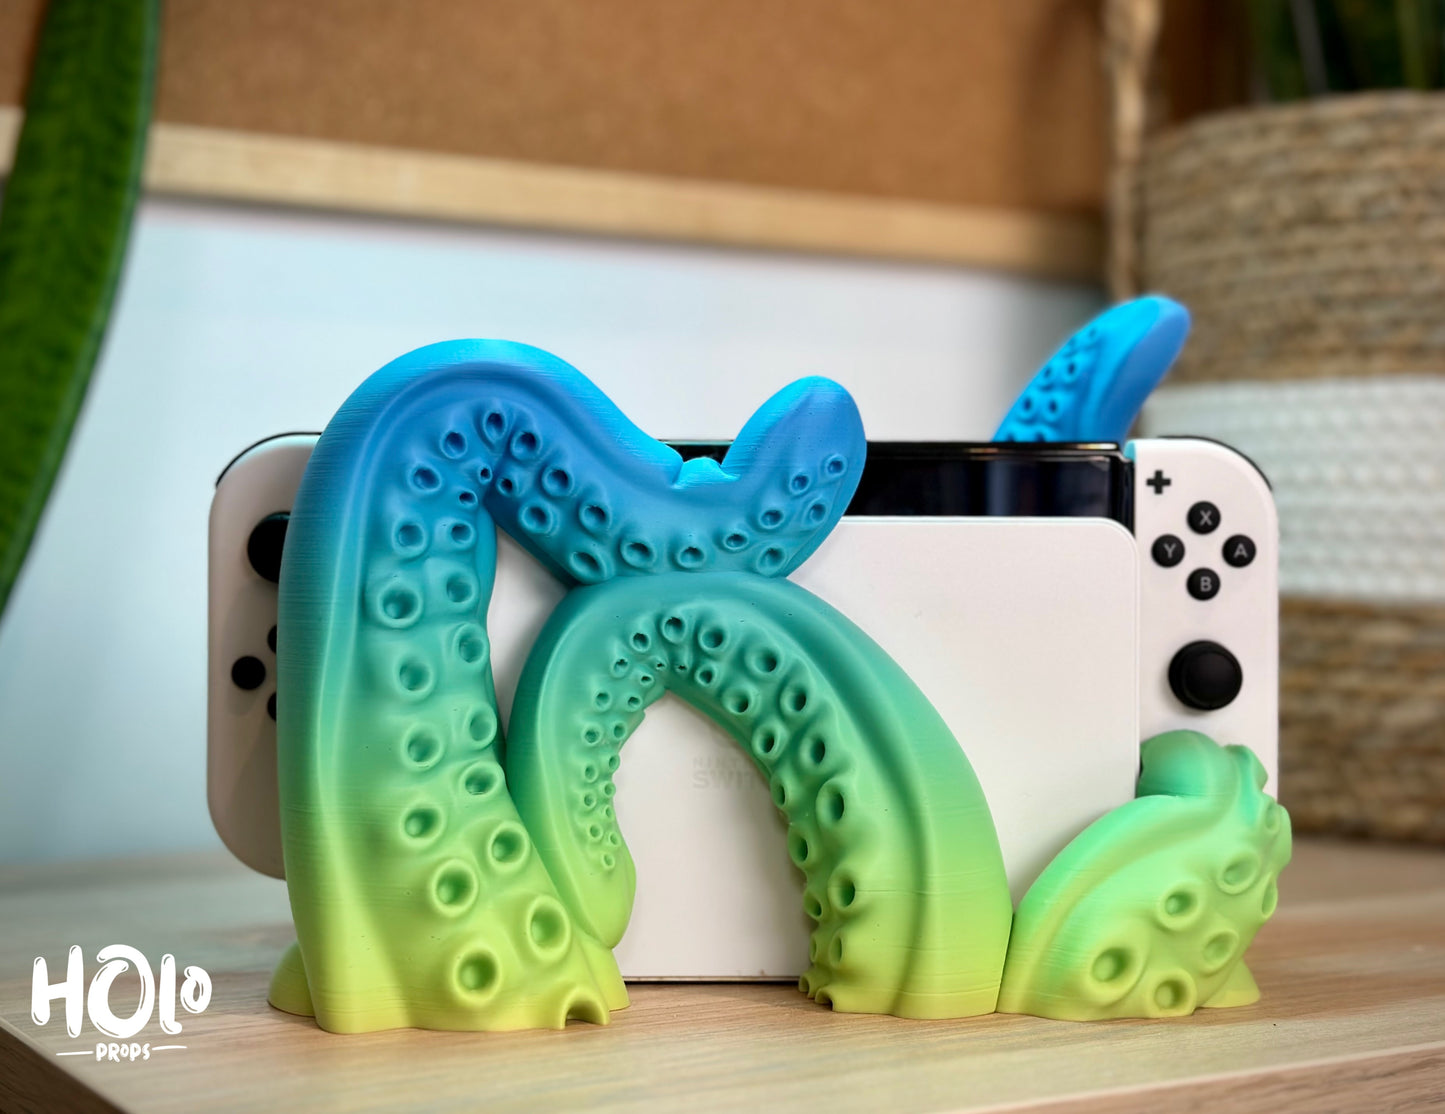 Tentacle Console Decoration - Compatible with Nintendo Switch Classic and OLED models